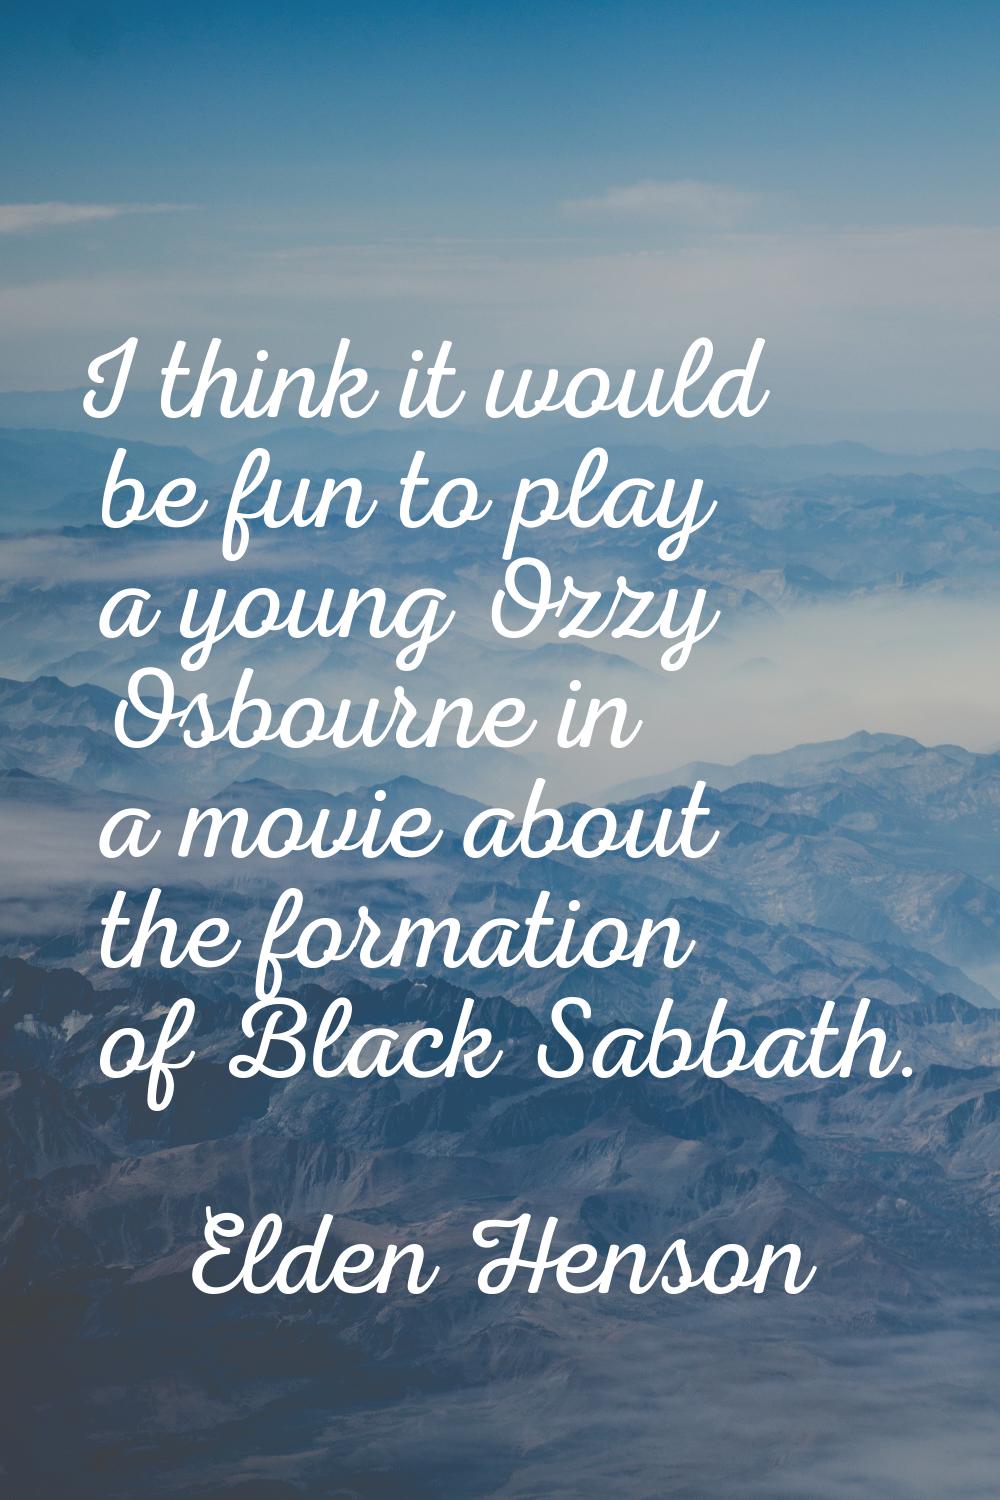 I think it would be fun to play a young Ozzy Osbourne in a movie about the formation of Black Sabba